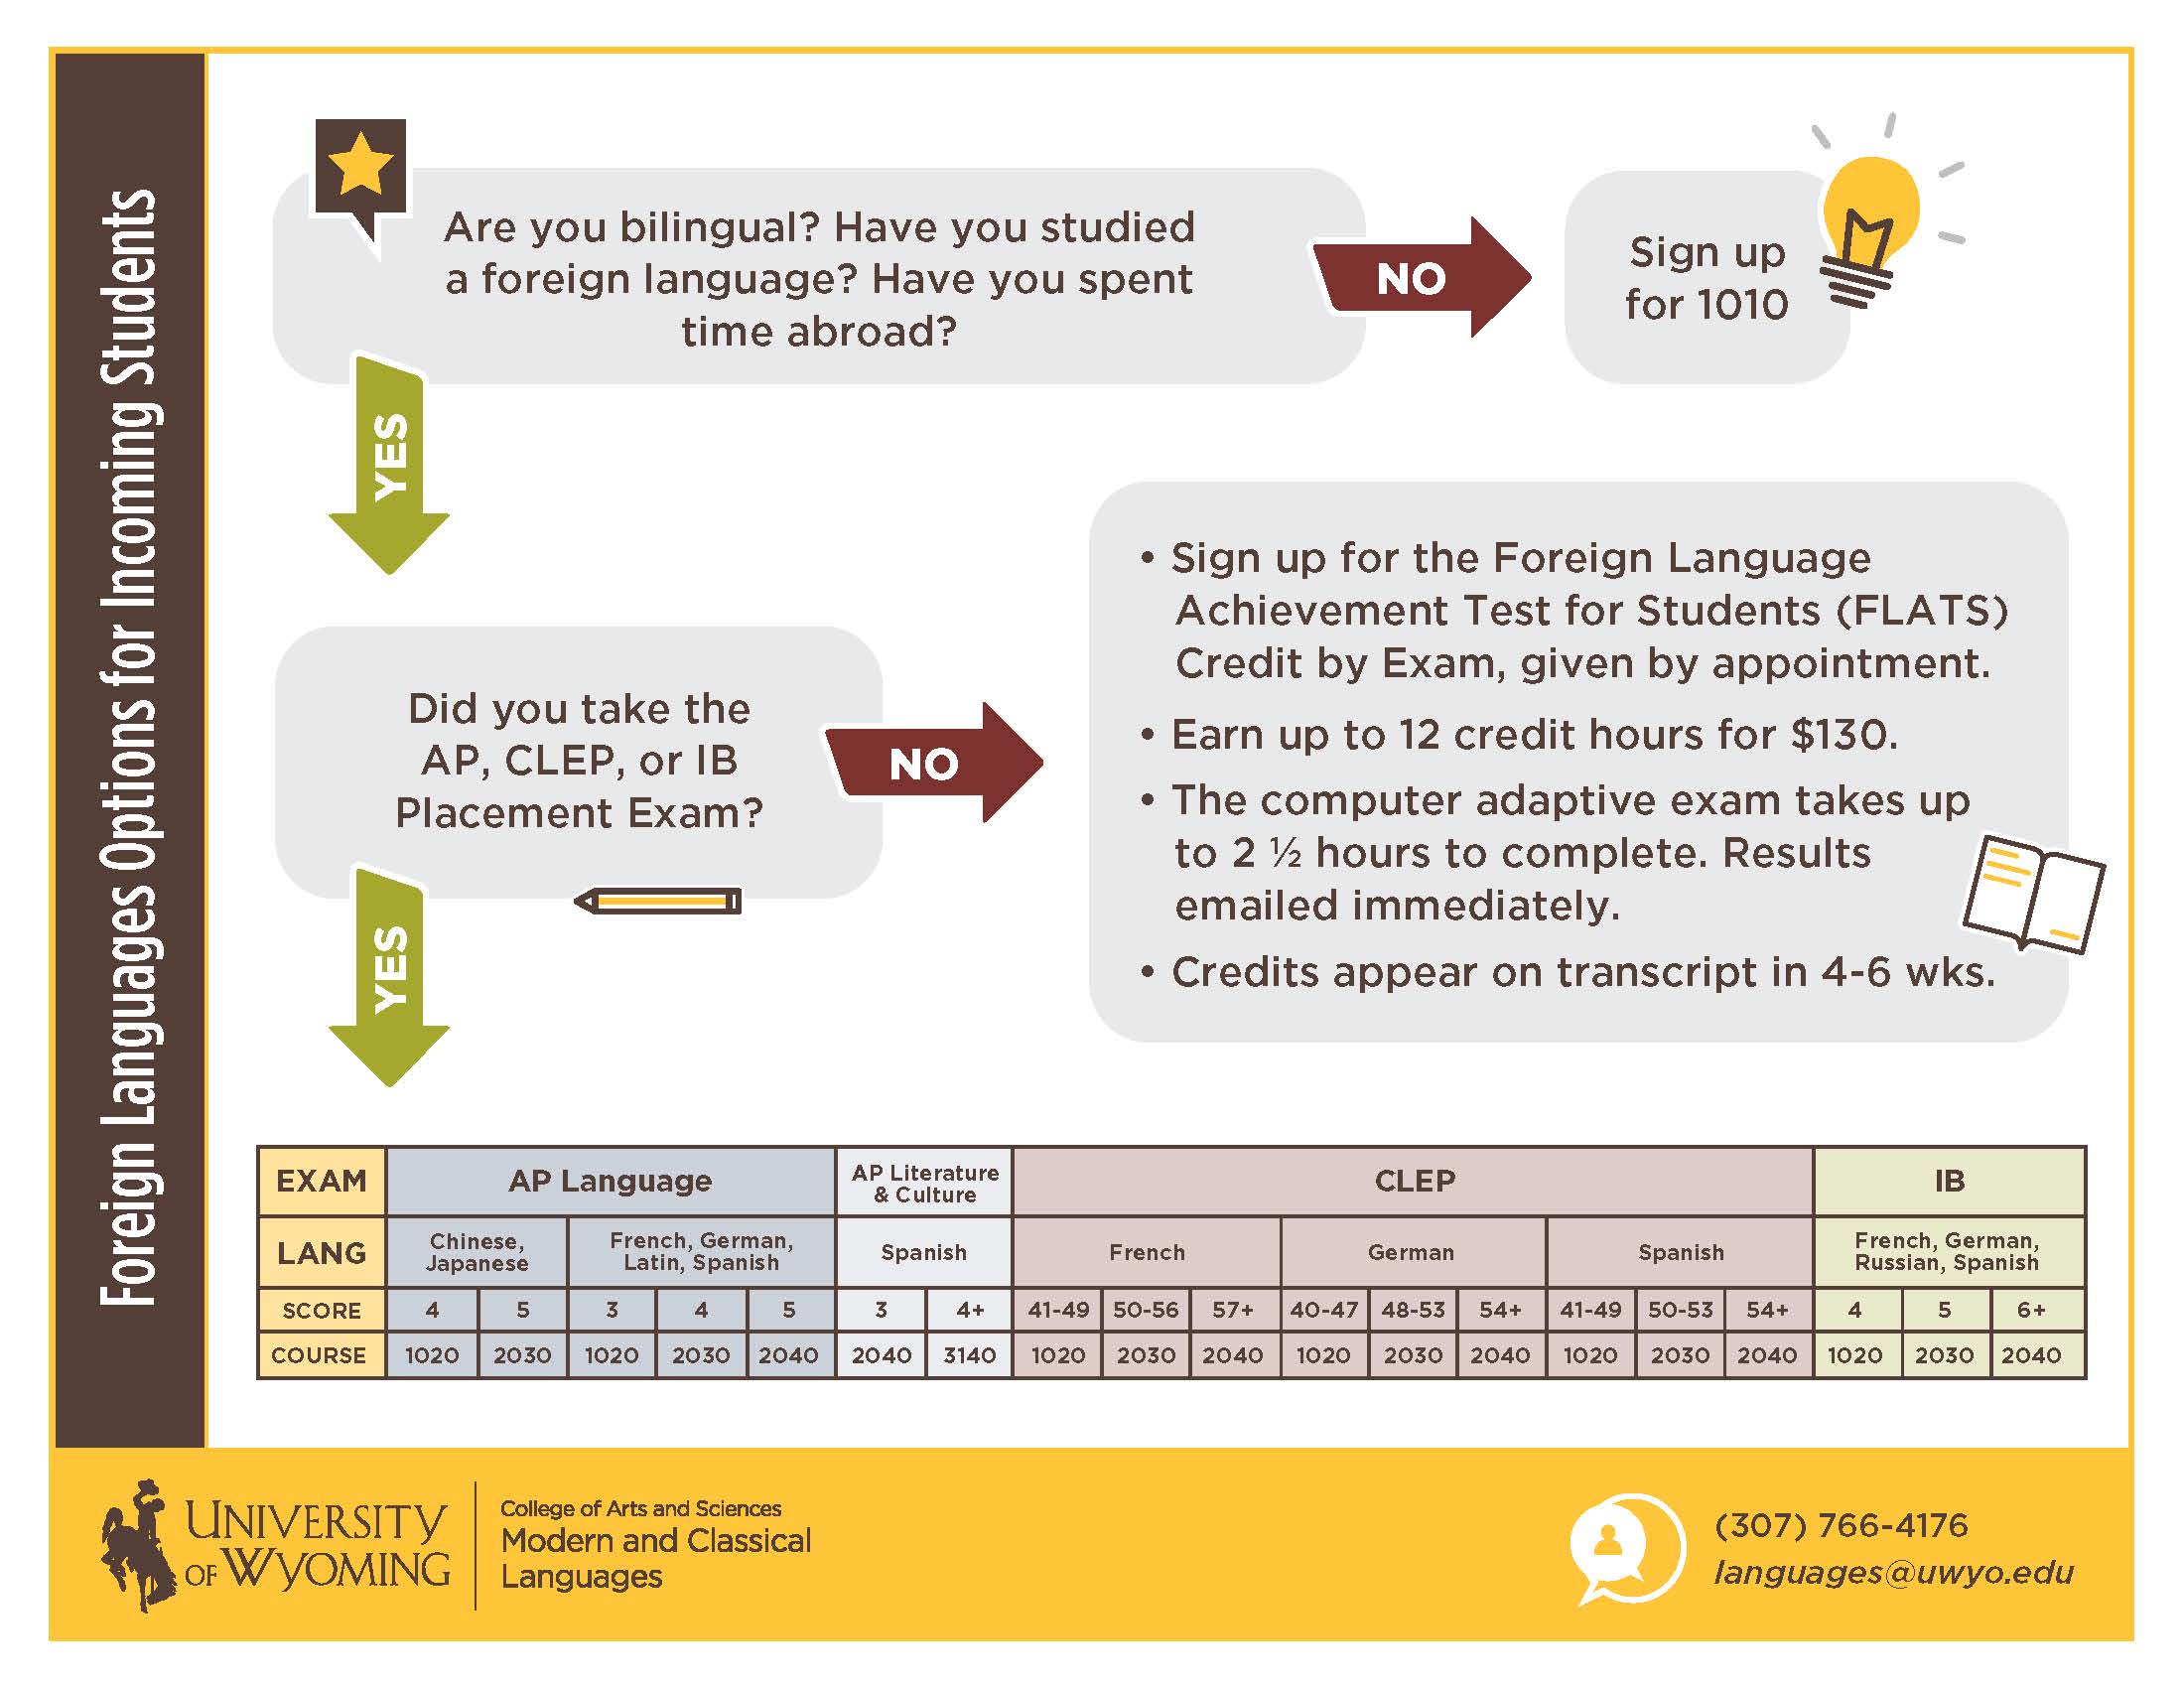 Information flow chart for language placement